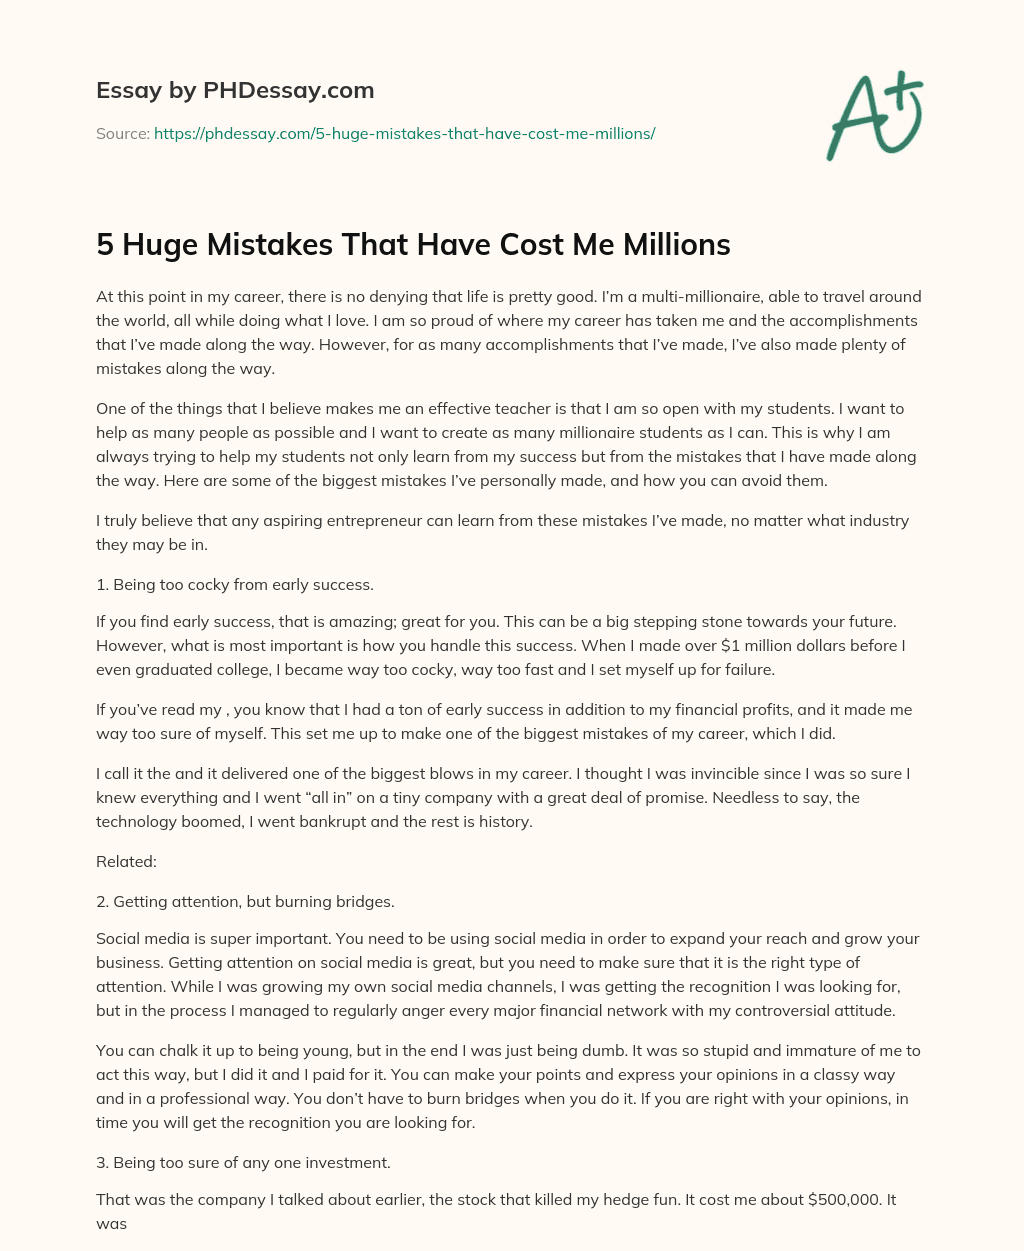 5 Huge Mistakes That Have Cost Me Millions essay